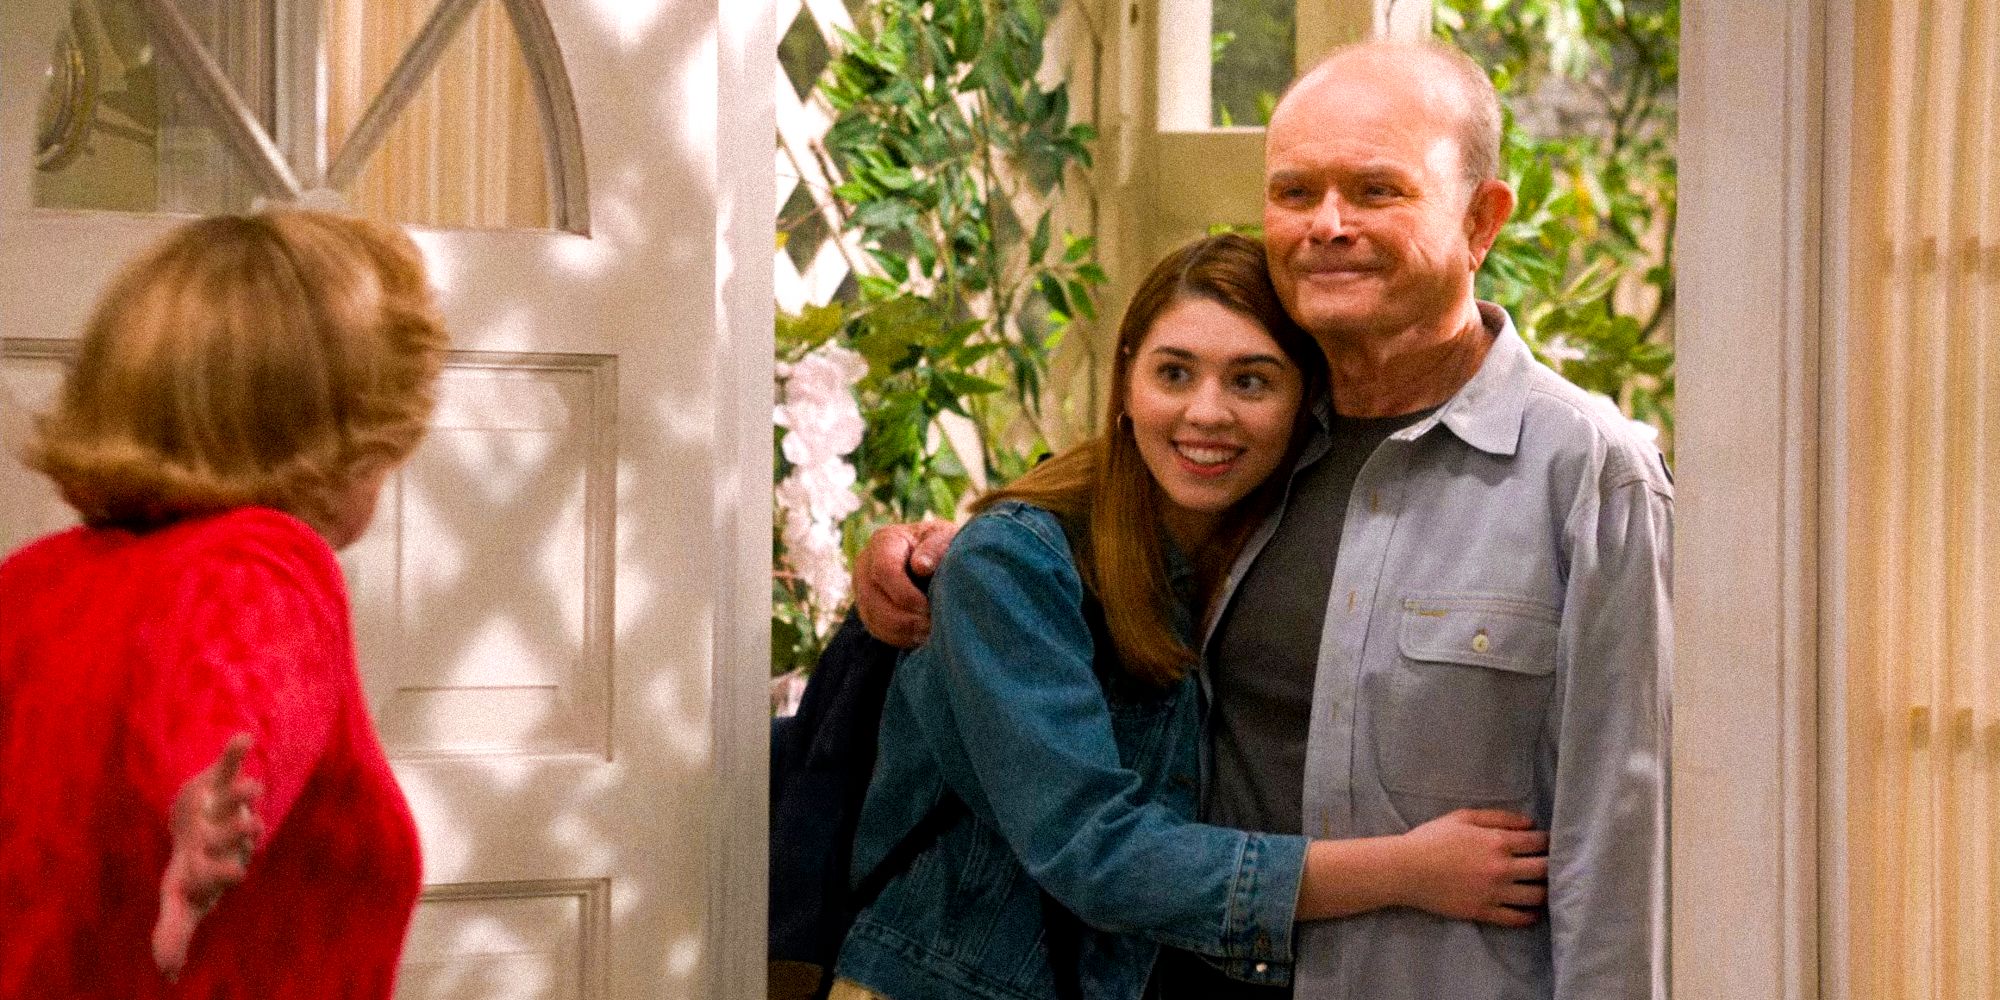 Leia (Callie Haverda) hugging Red (Kurtwood Smith) in That 90s show part 2 Episode 1